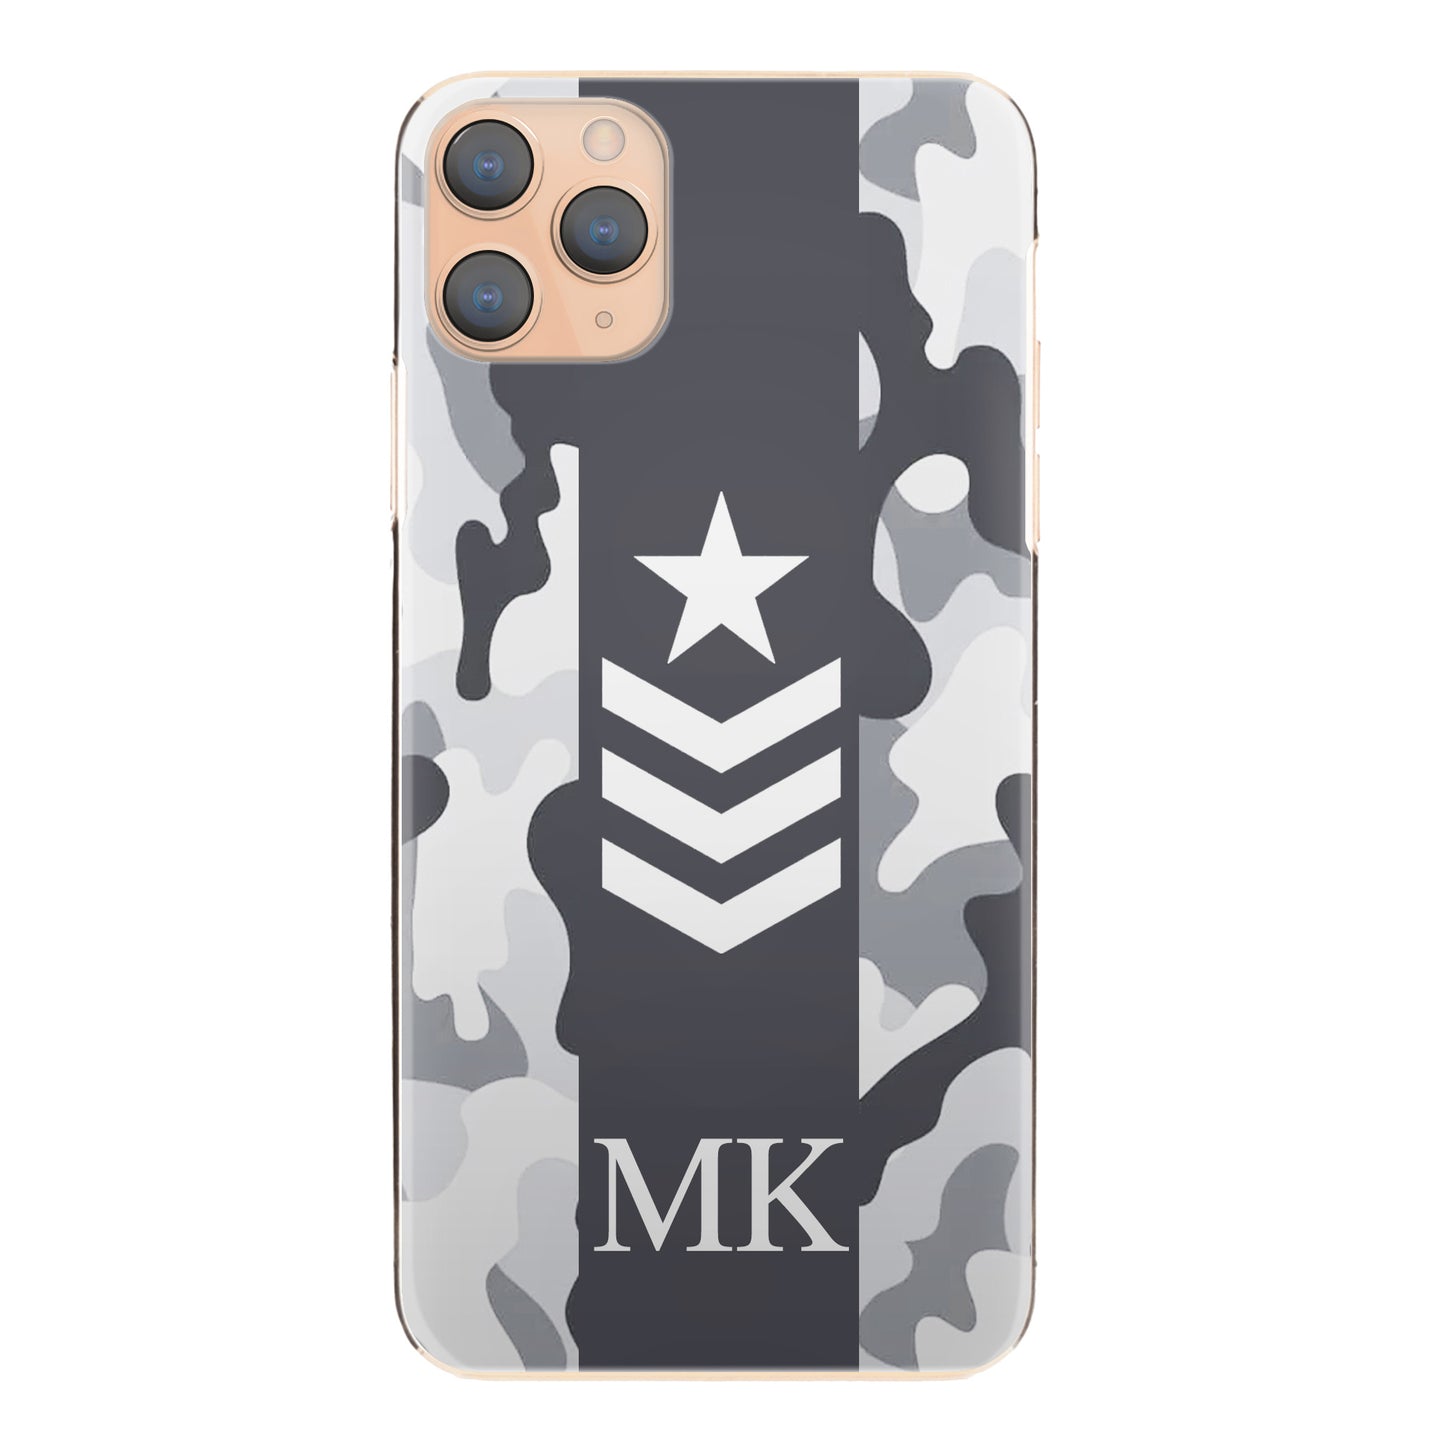 Personalised Xiaomi Phone Hard Case with Initials and Army Rank on Artic Camo